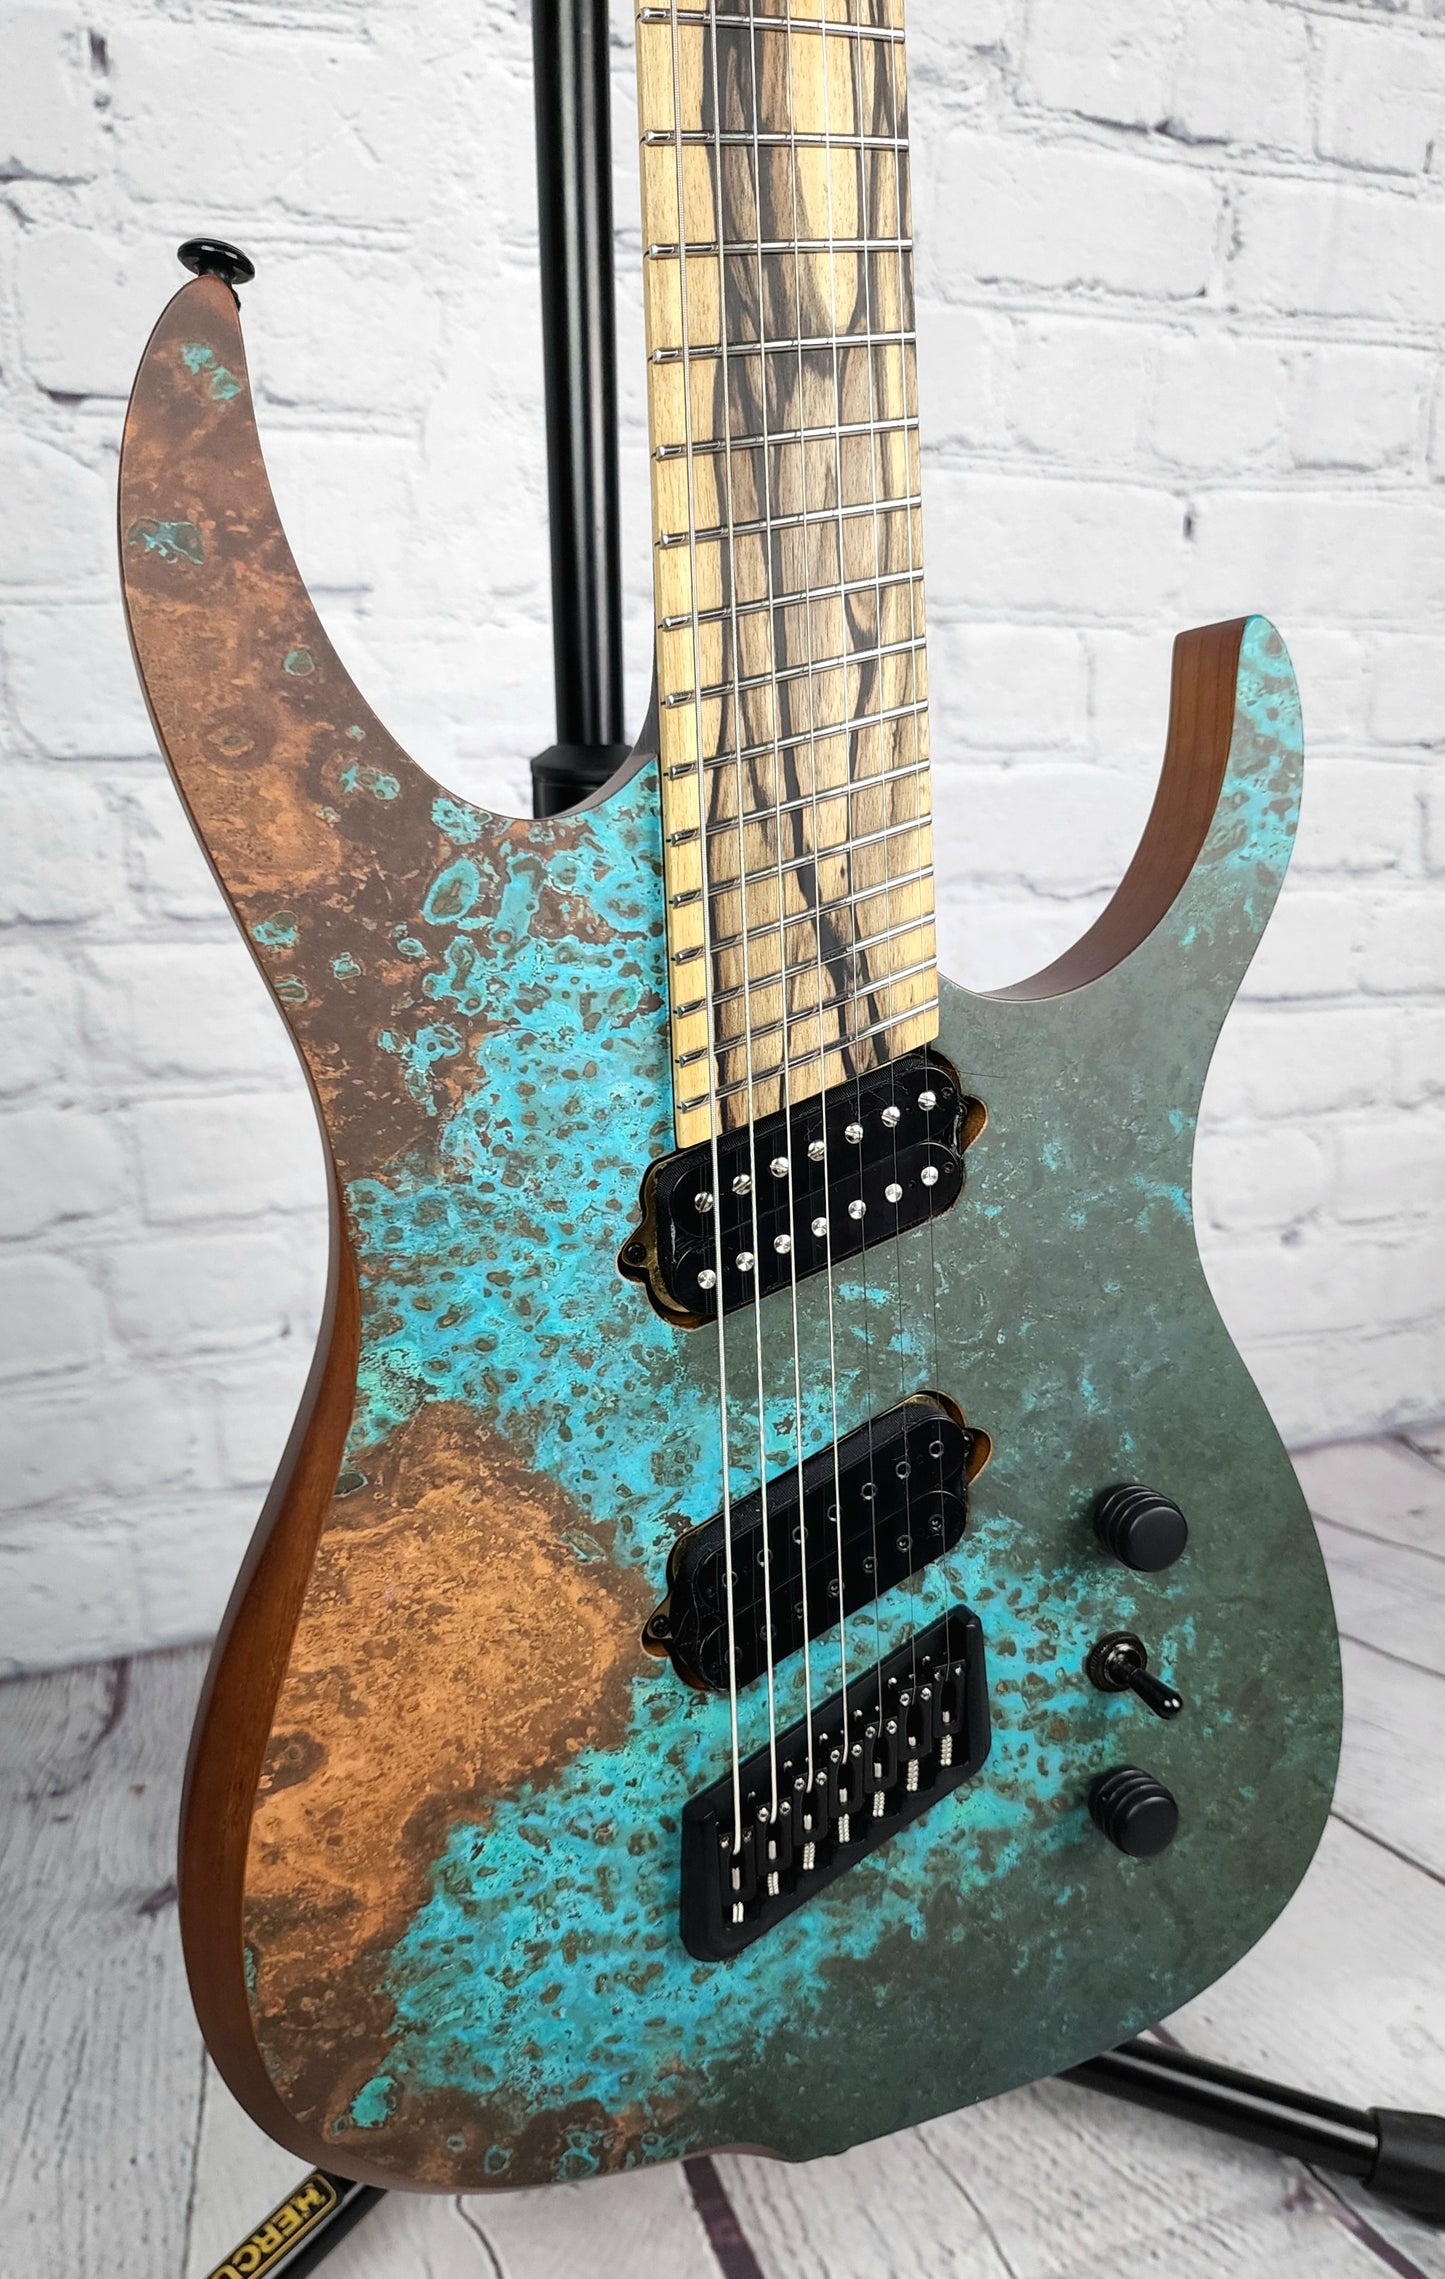 Ormsby Hype GTR Elite 7 String Copper Print Electric Guitar Wenge Neck